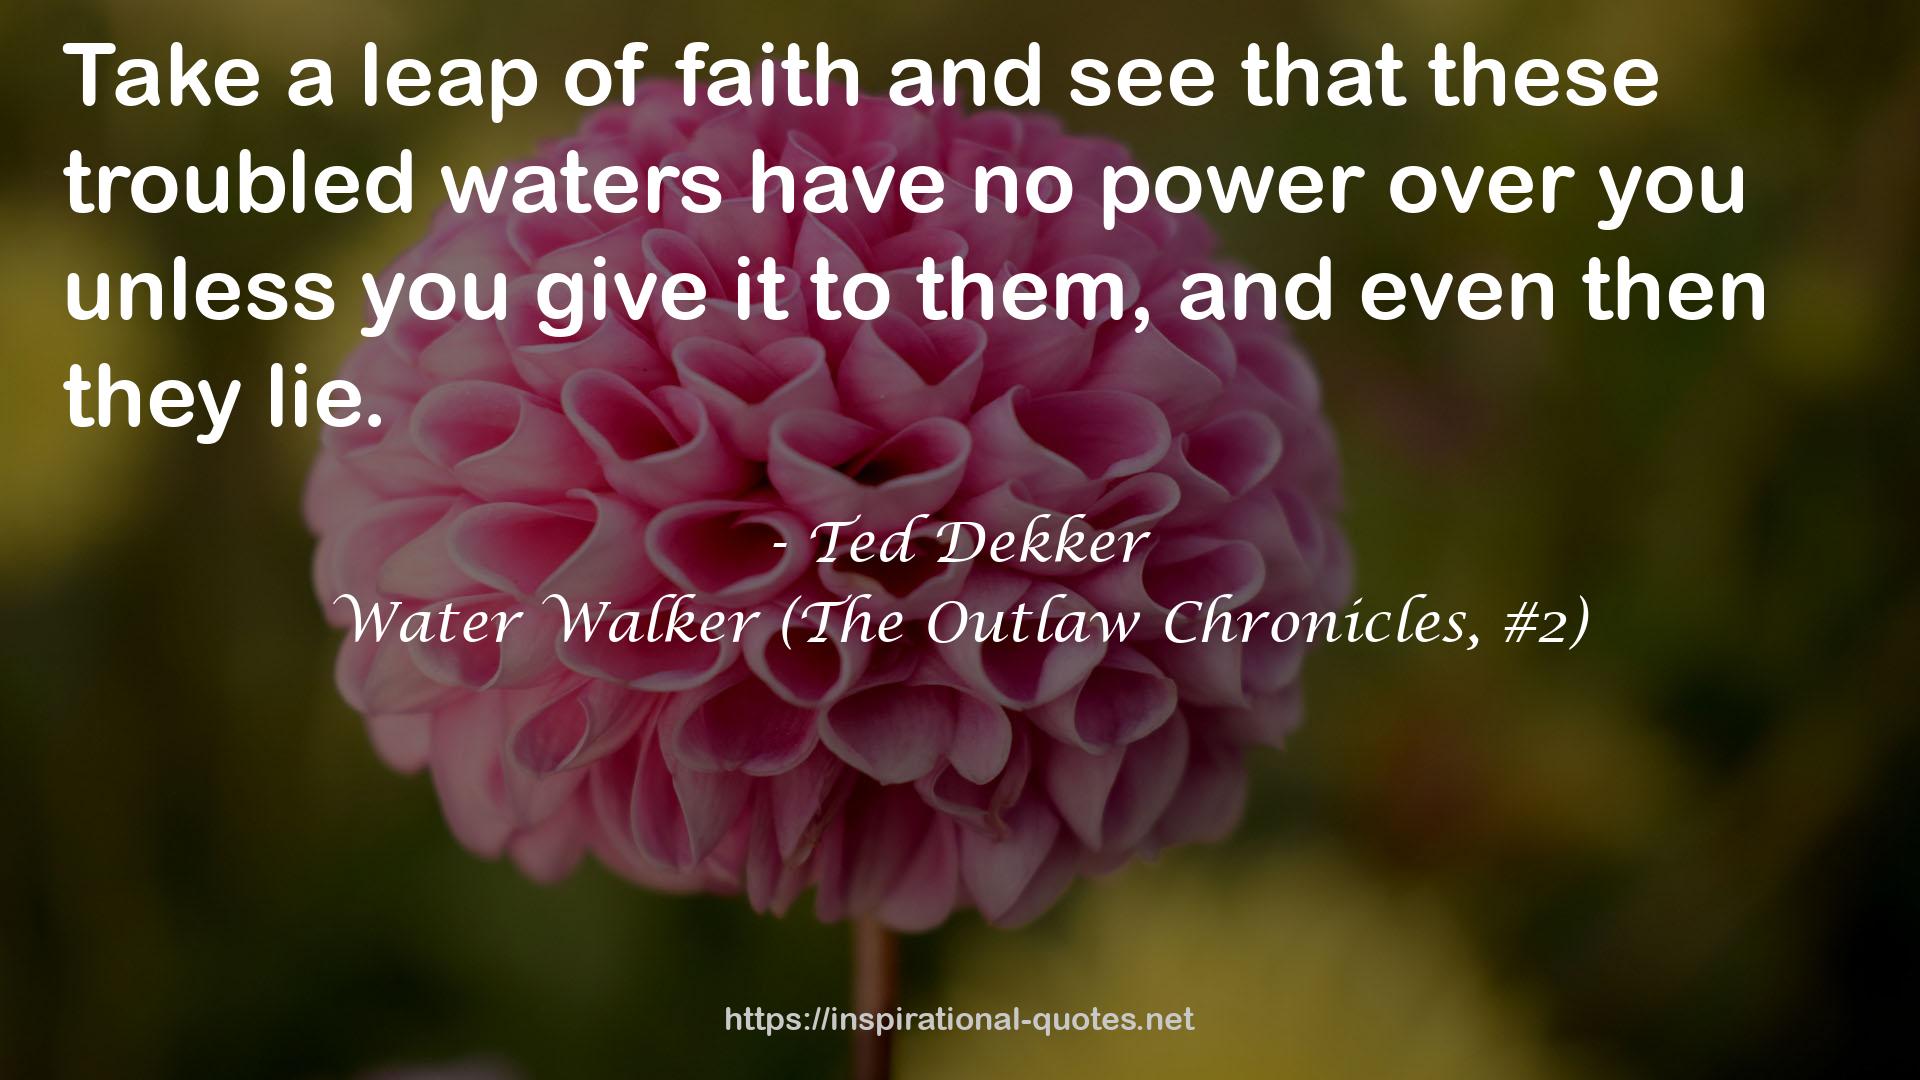 Water Walker (The Outlaw Chronicles, #2) QUOTES